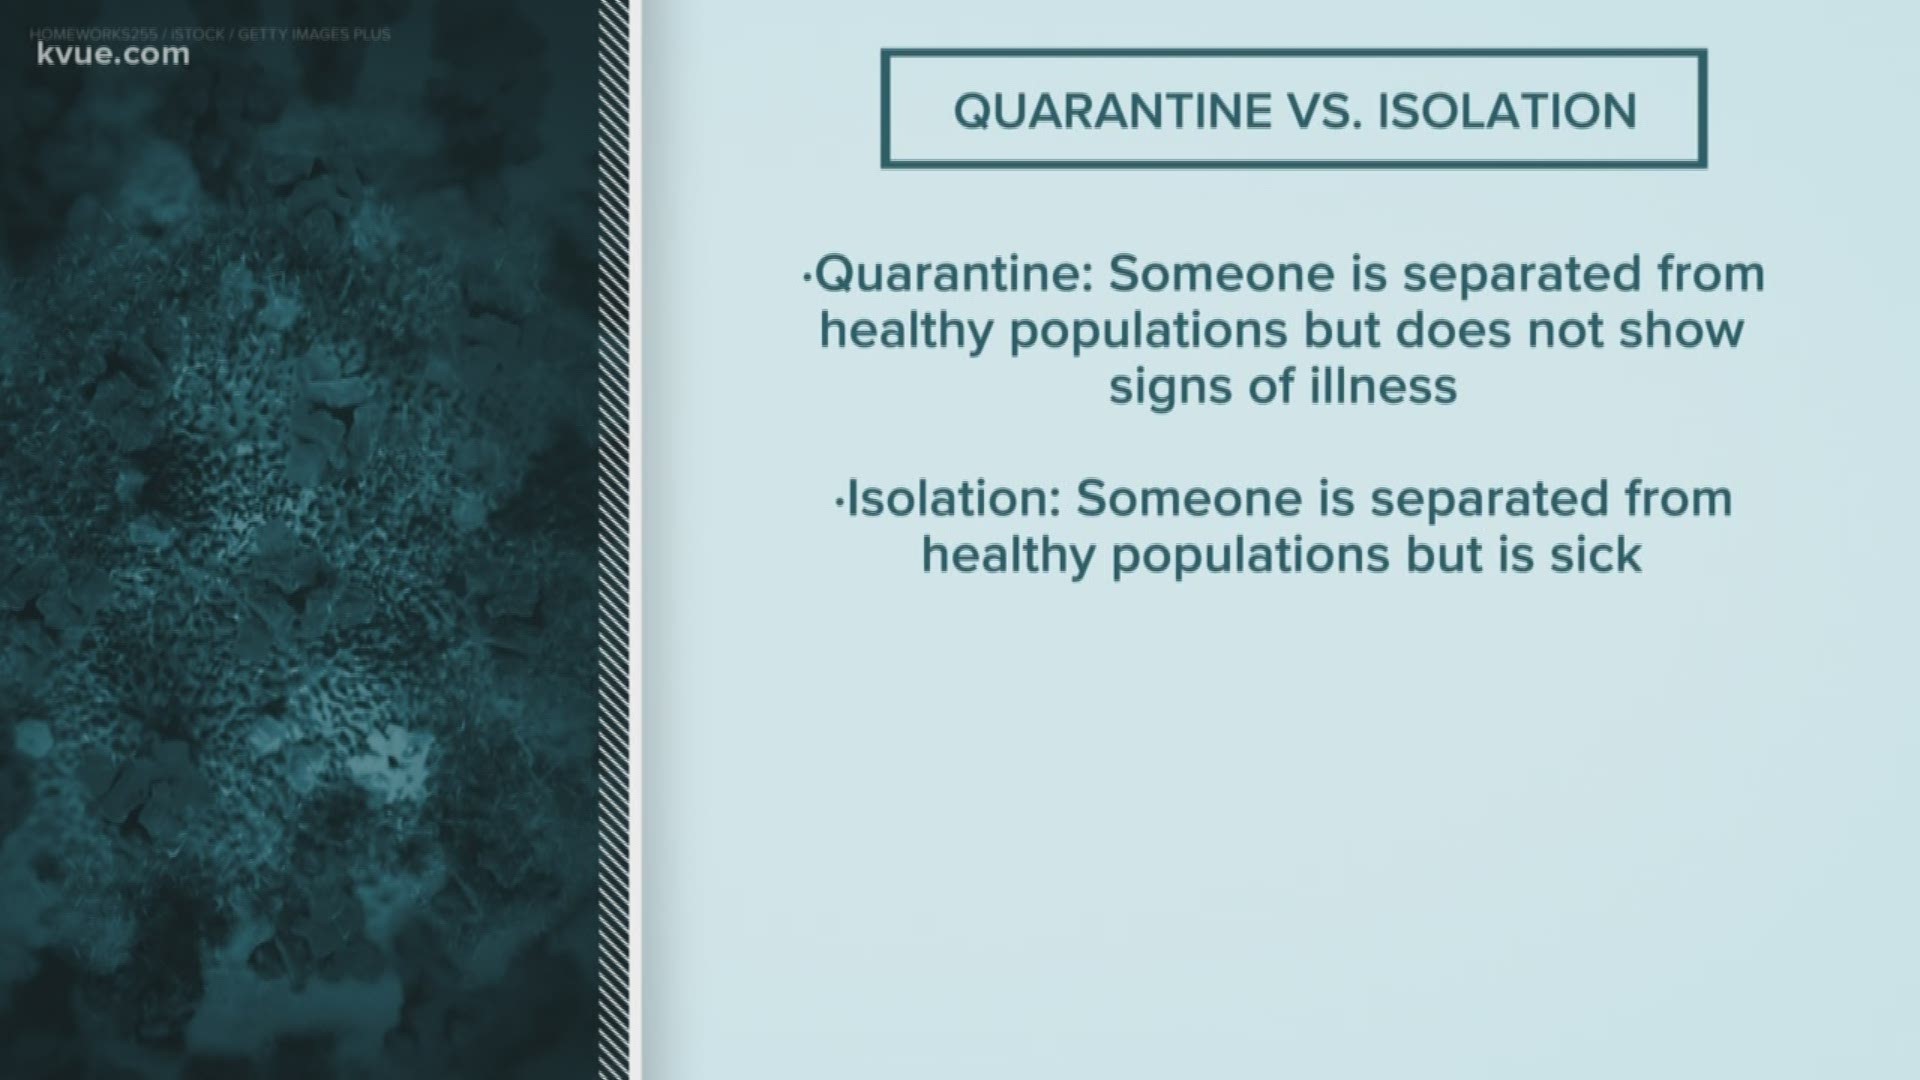 As people stay home to monitor coronavirus symptoms, there may be some confusion over the terms "quarantine" and "isolation."